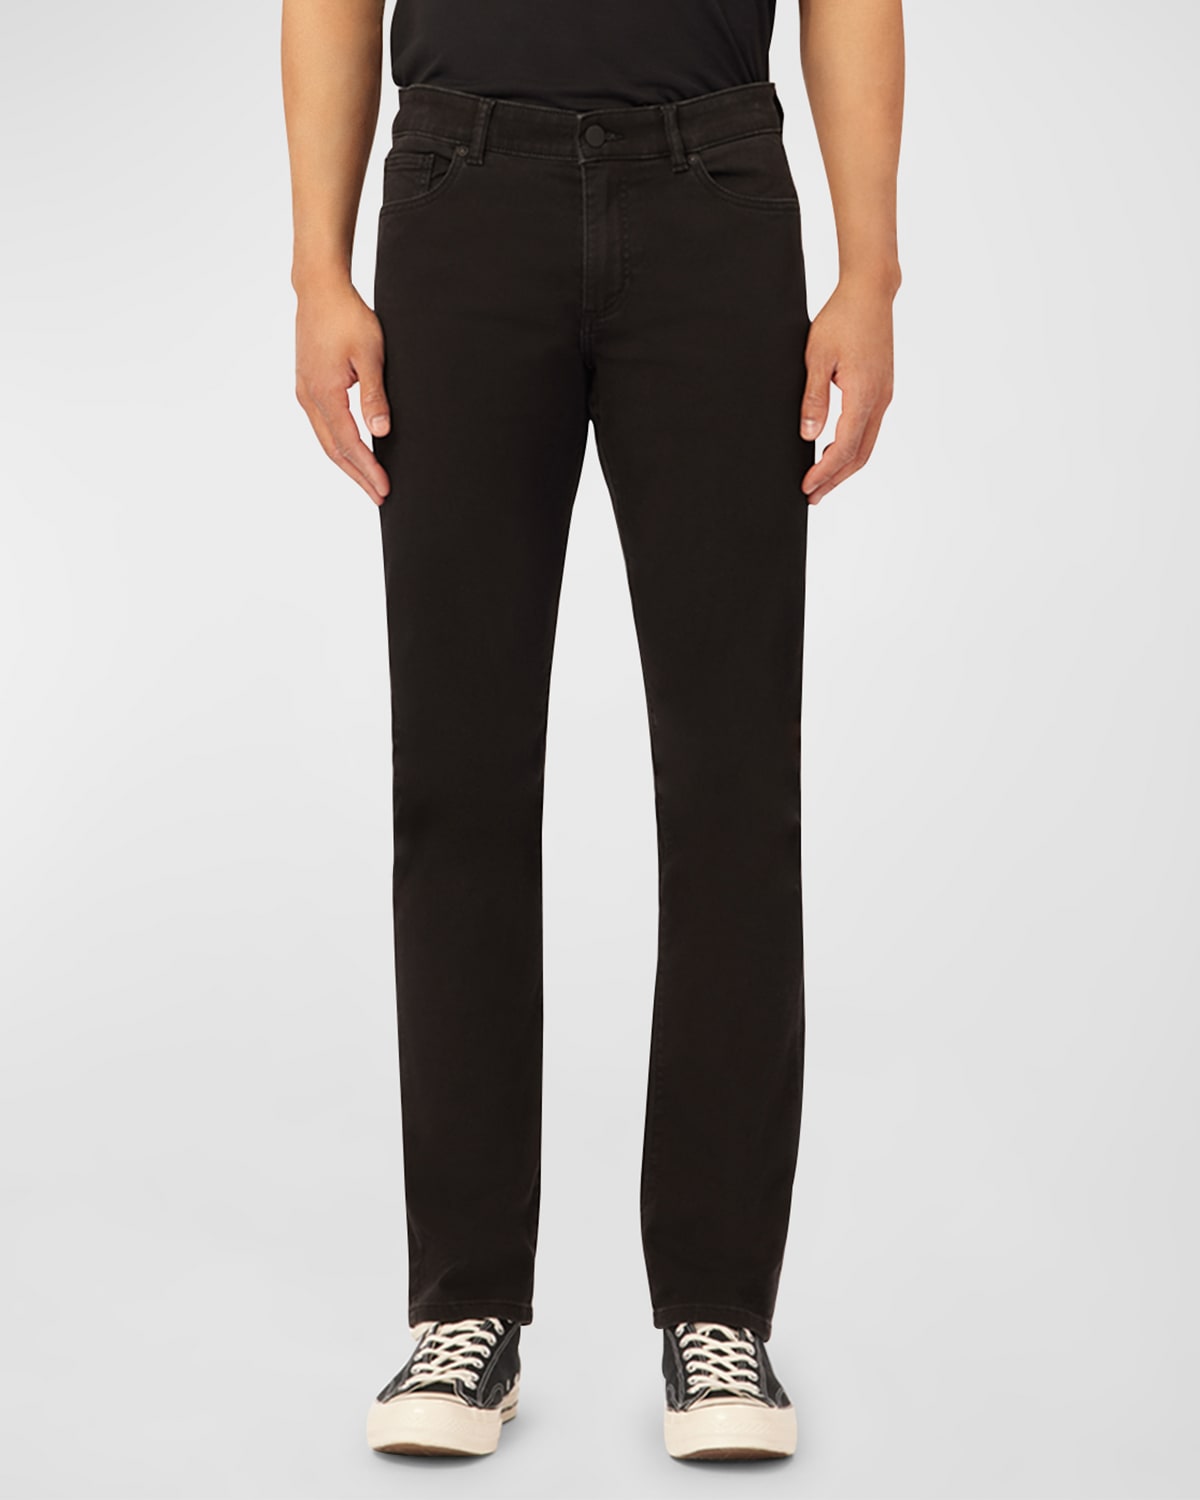 Dl1961 Men's Russell Slim Straight Jeans In Cavern